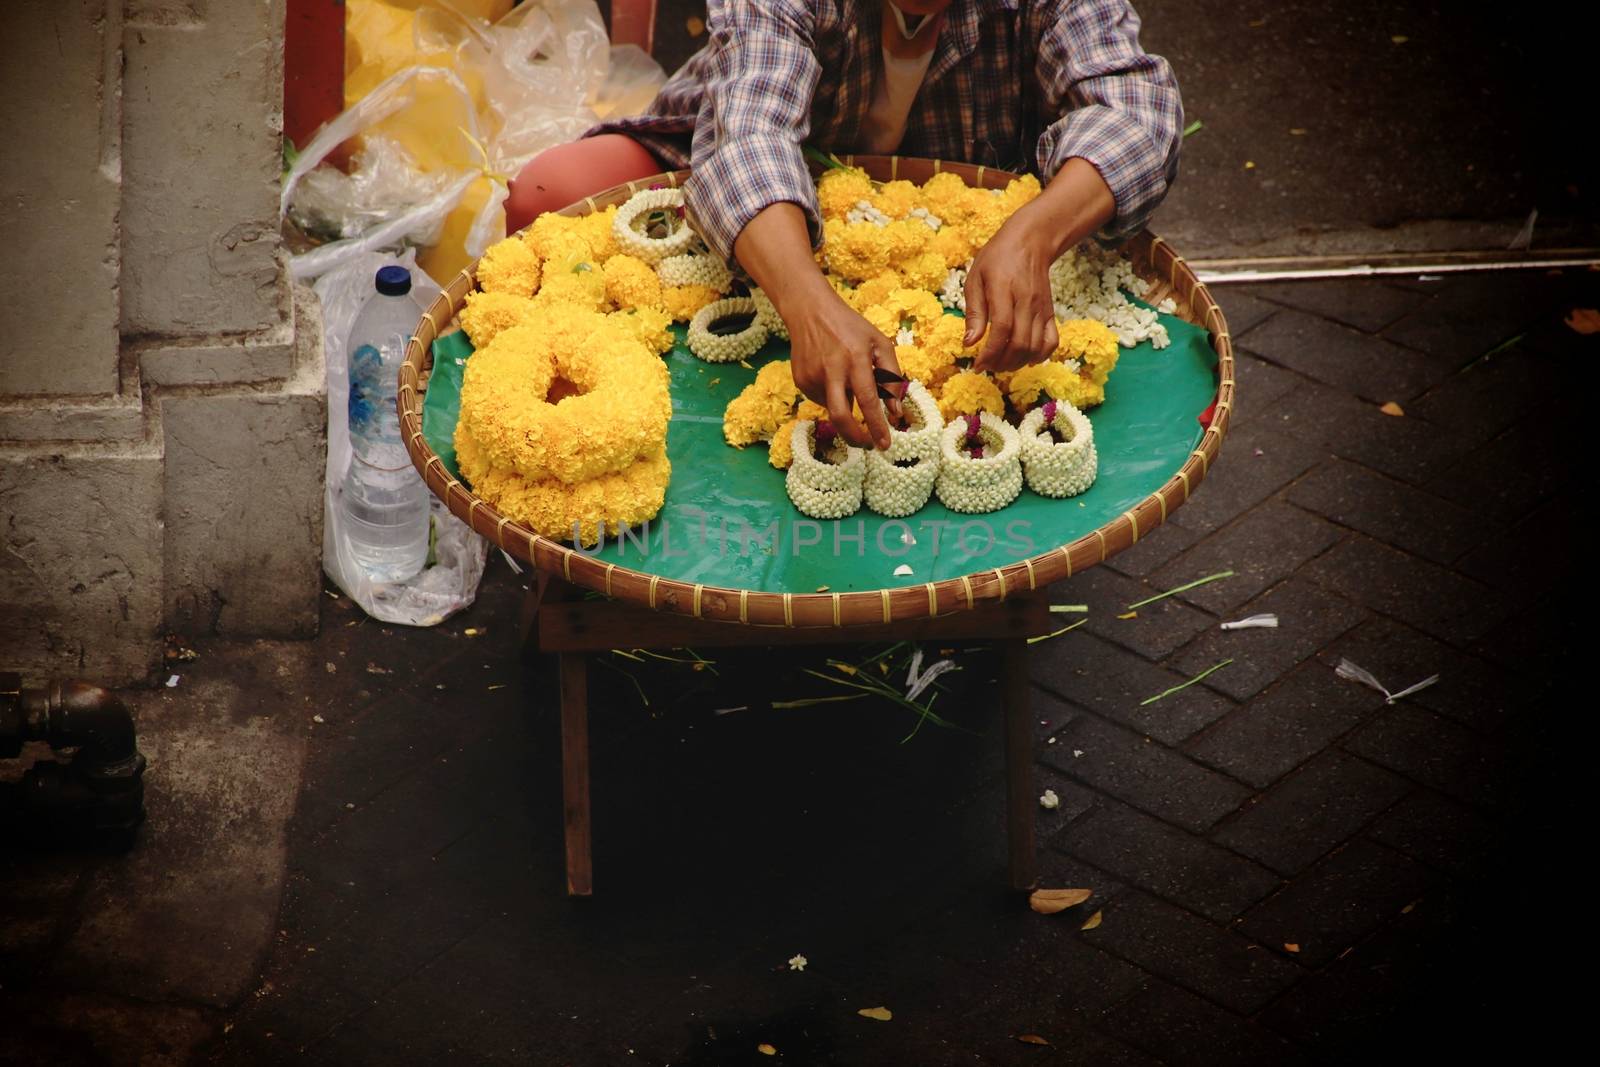 Thai street vendor selling Phuang malai or malai, which is a flower garland used for buddhist offerings and charms for good luck in the Thai culture and religion